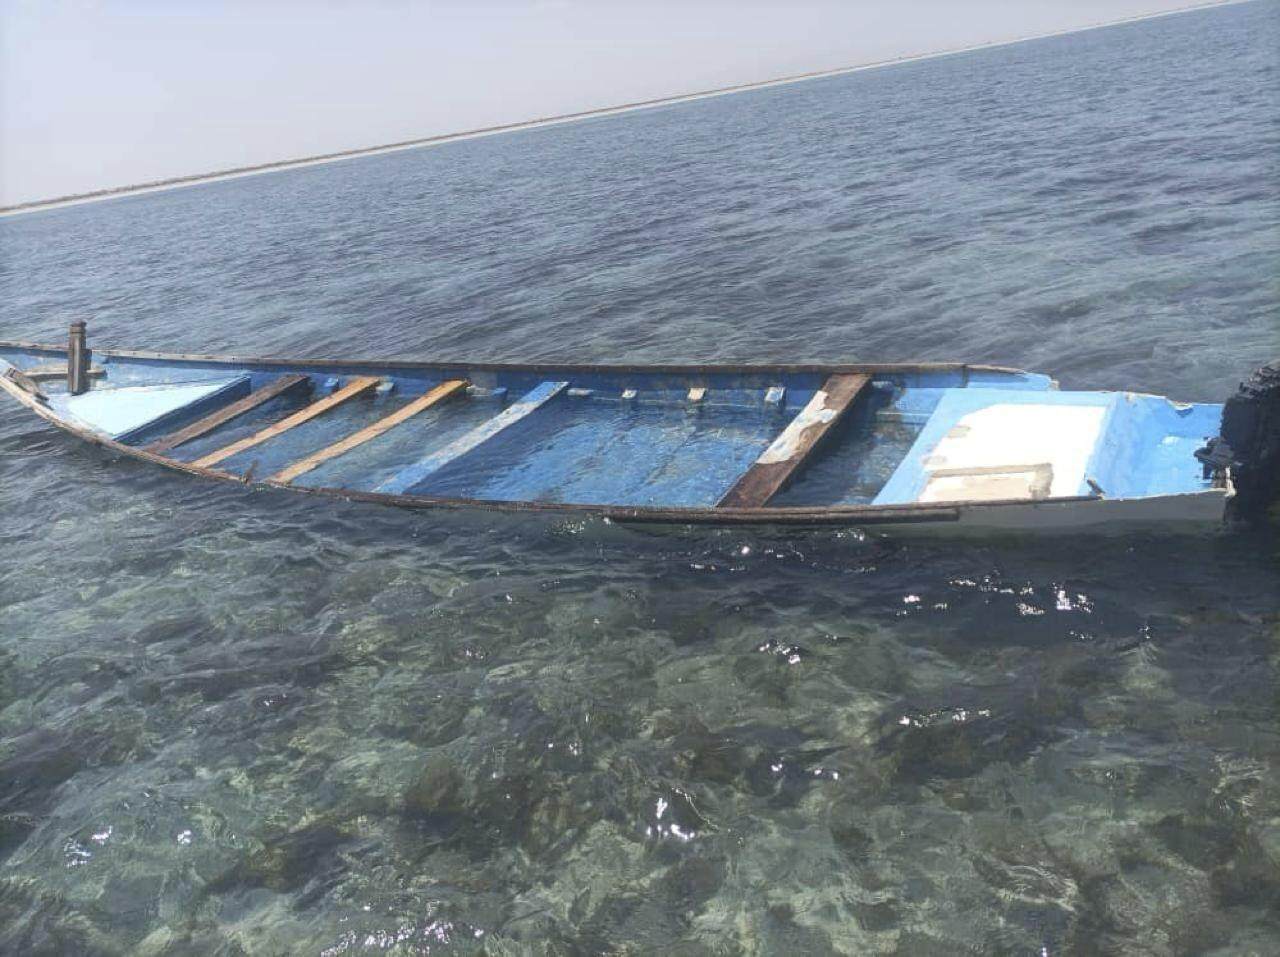 A capsized boat is seen near the coastal town of Obock, in northeastern Djibouti on Tuesday. Photo: International Organization for Migration via AP